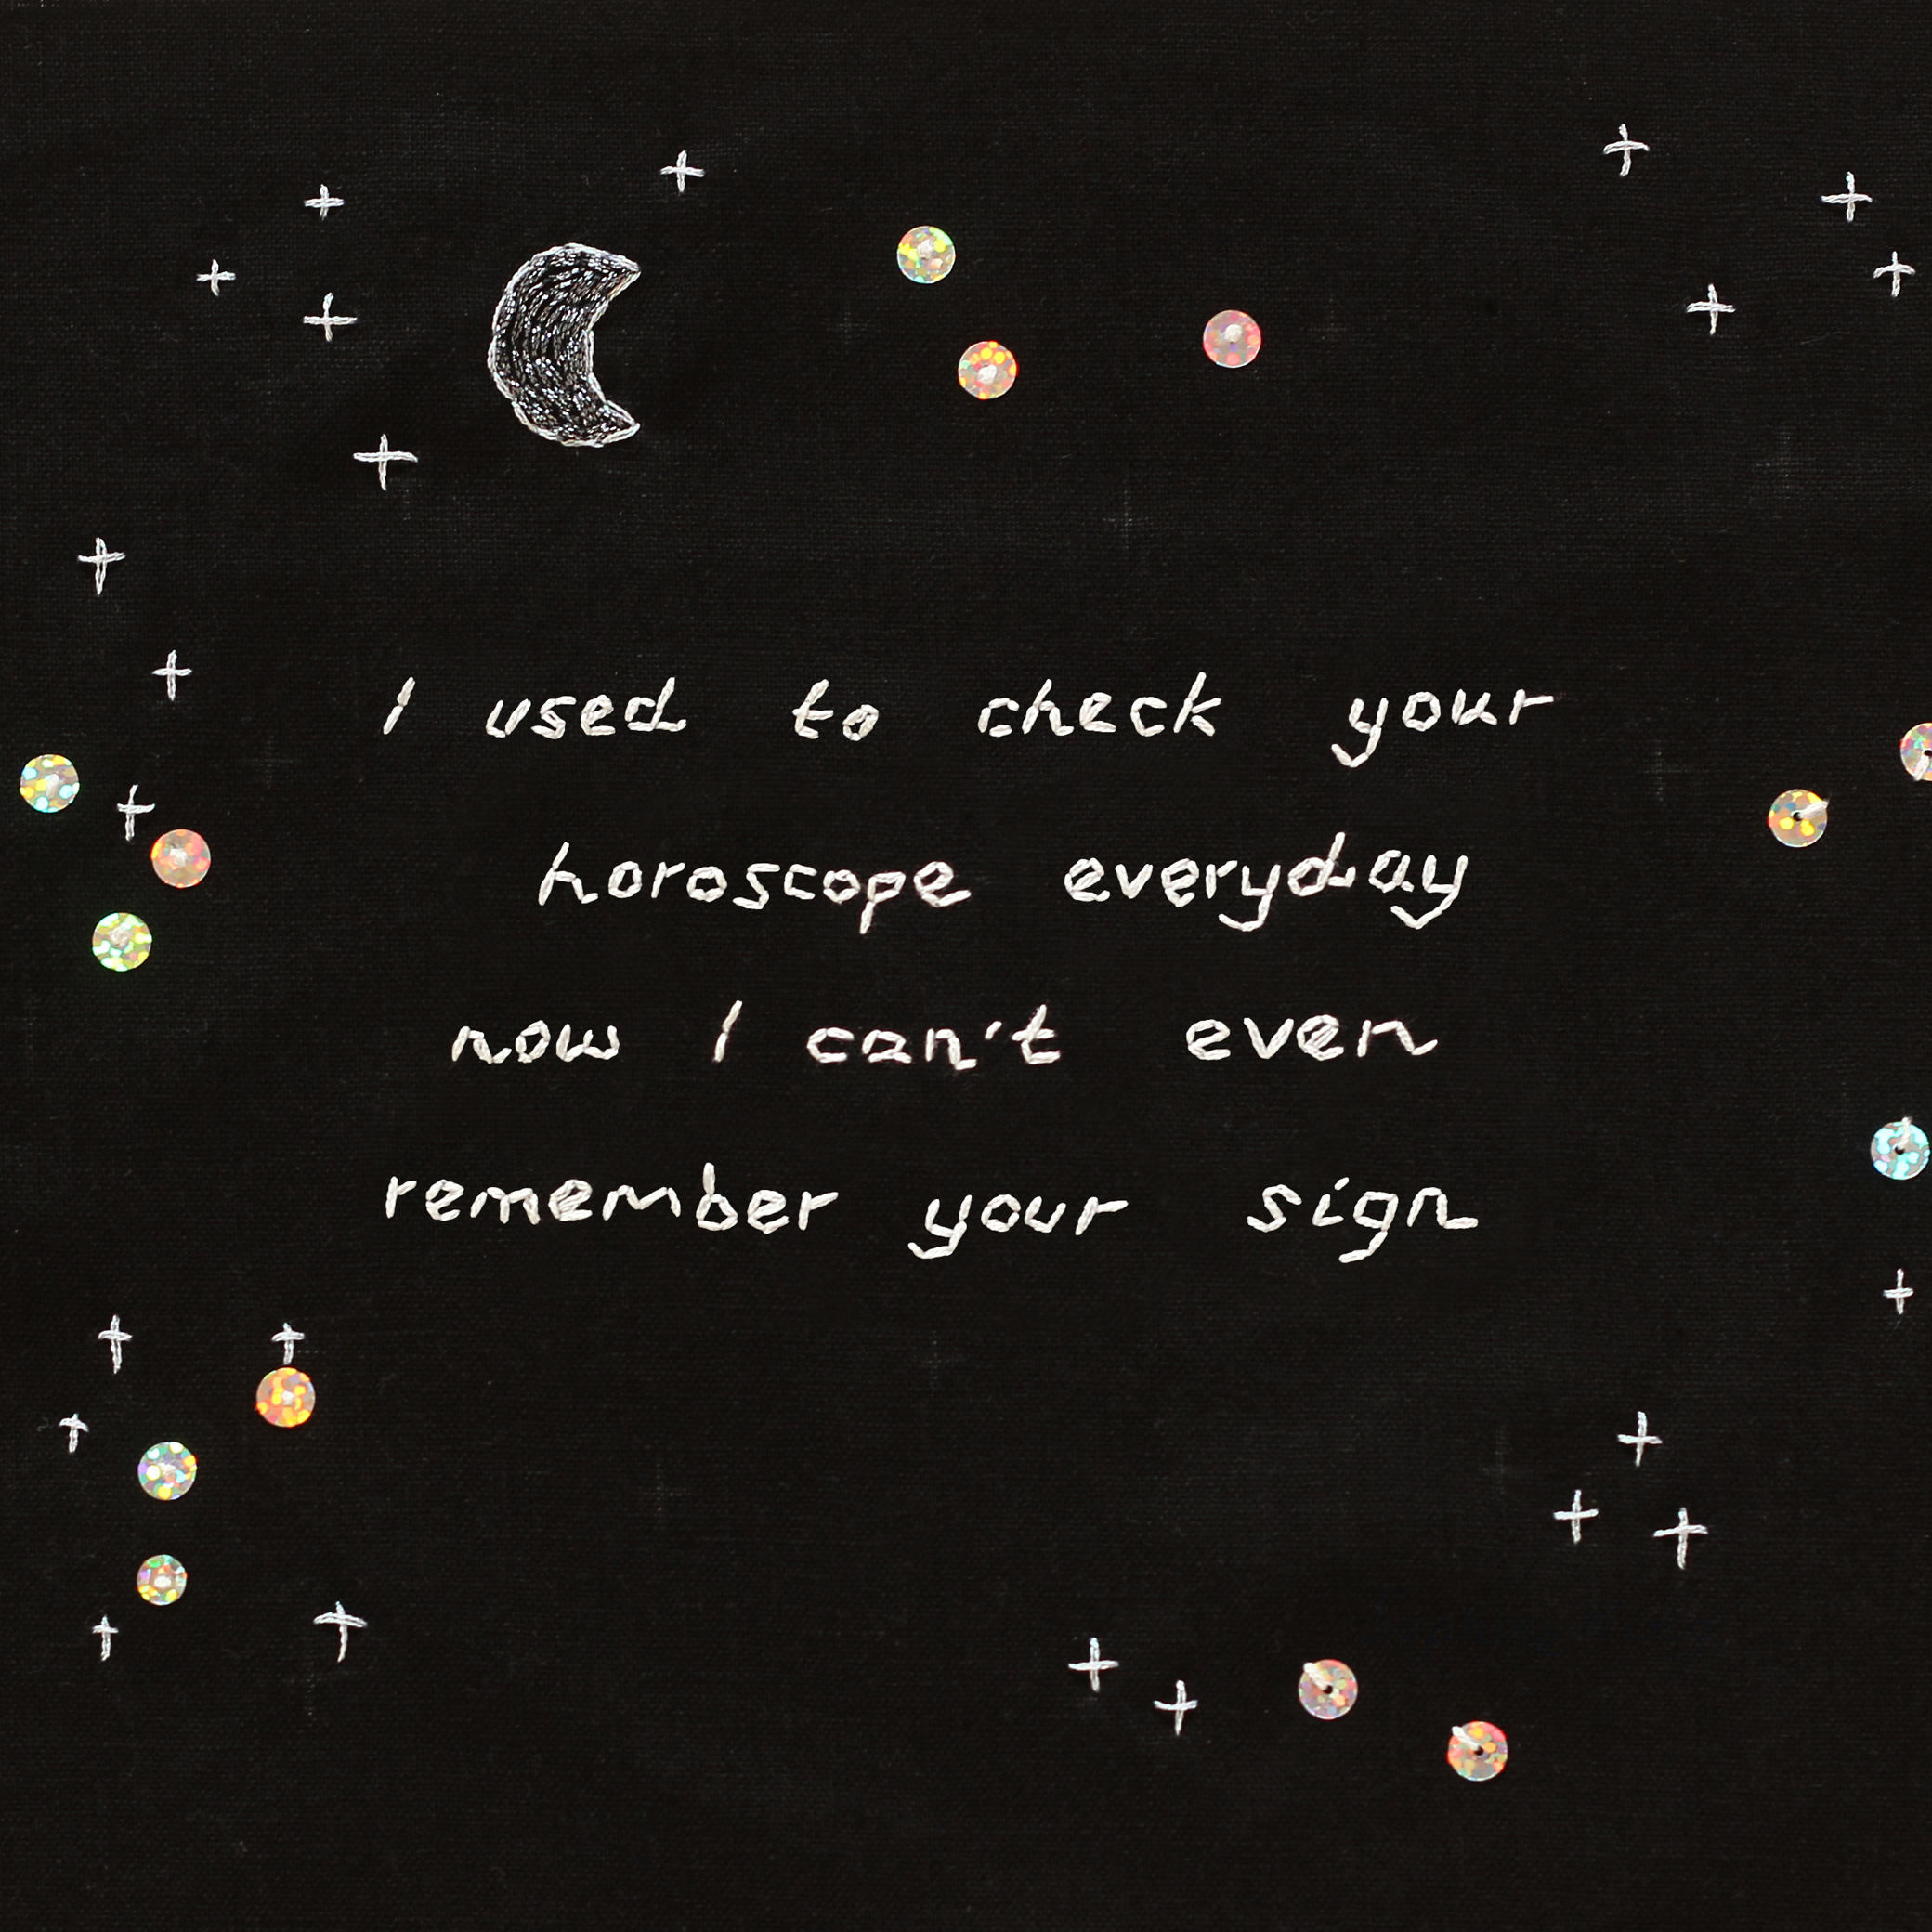 embroidered "I used to check your horoscope everyday now I can't remember your sign", 2019, Sophie King